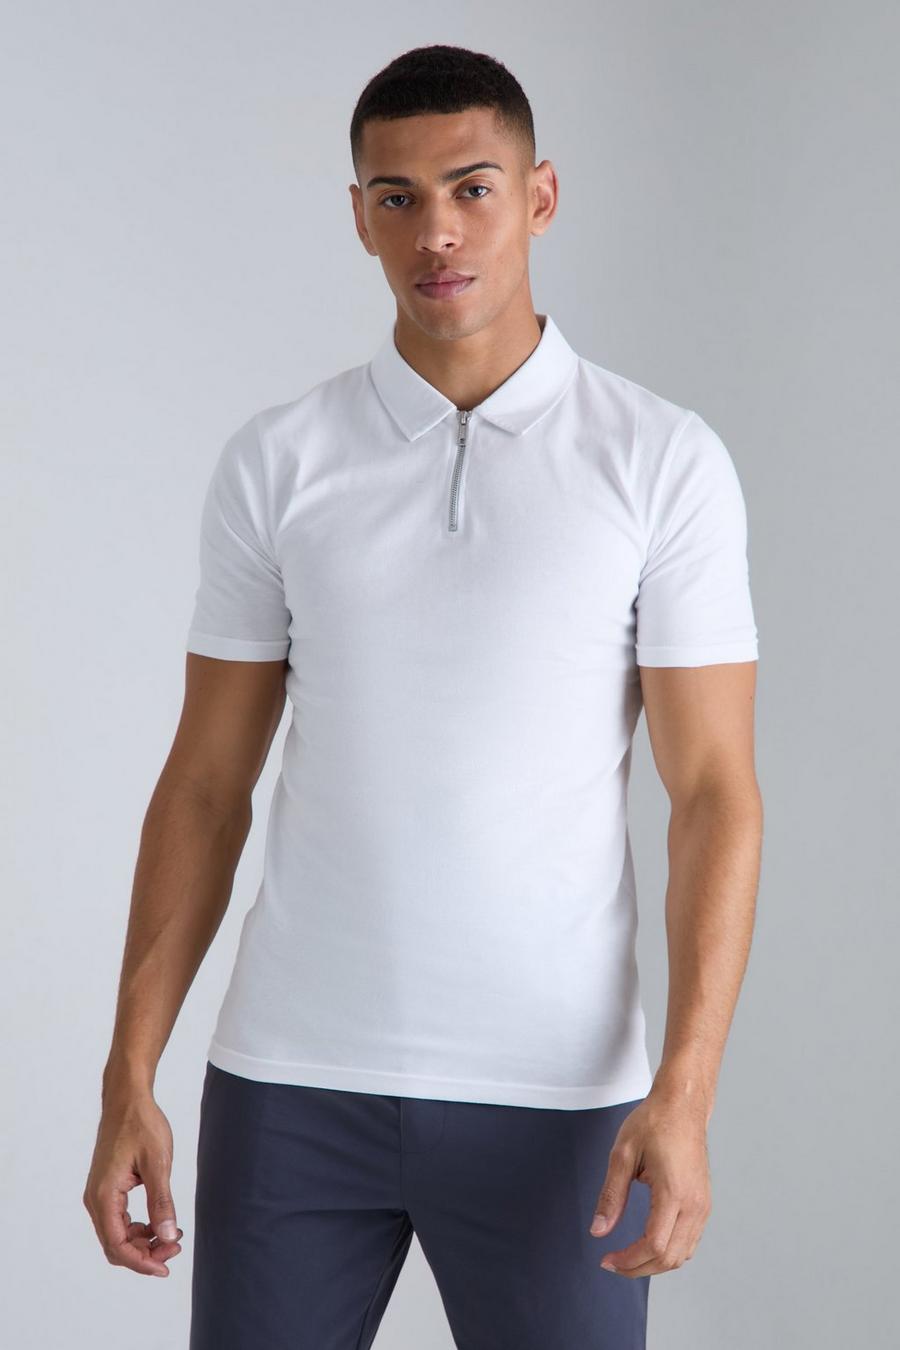 White Muscle Zip Neck bege Polo image number 1